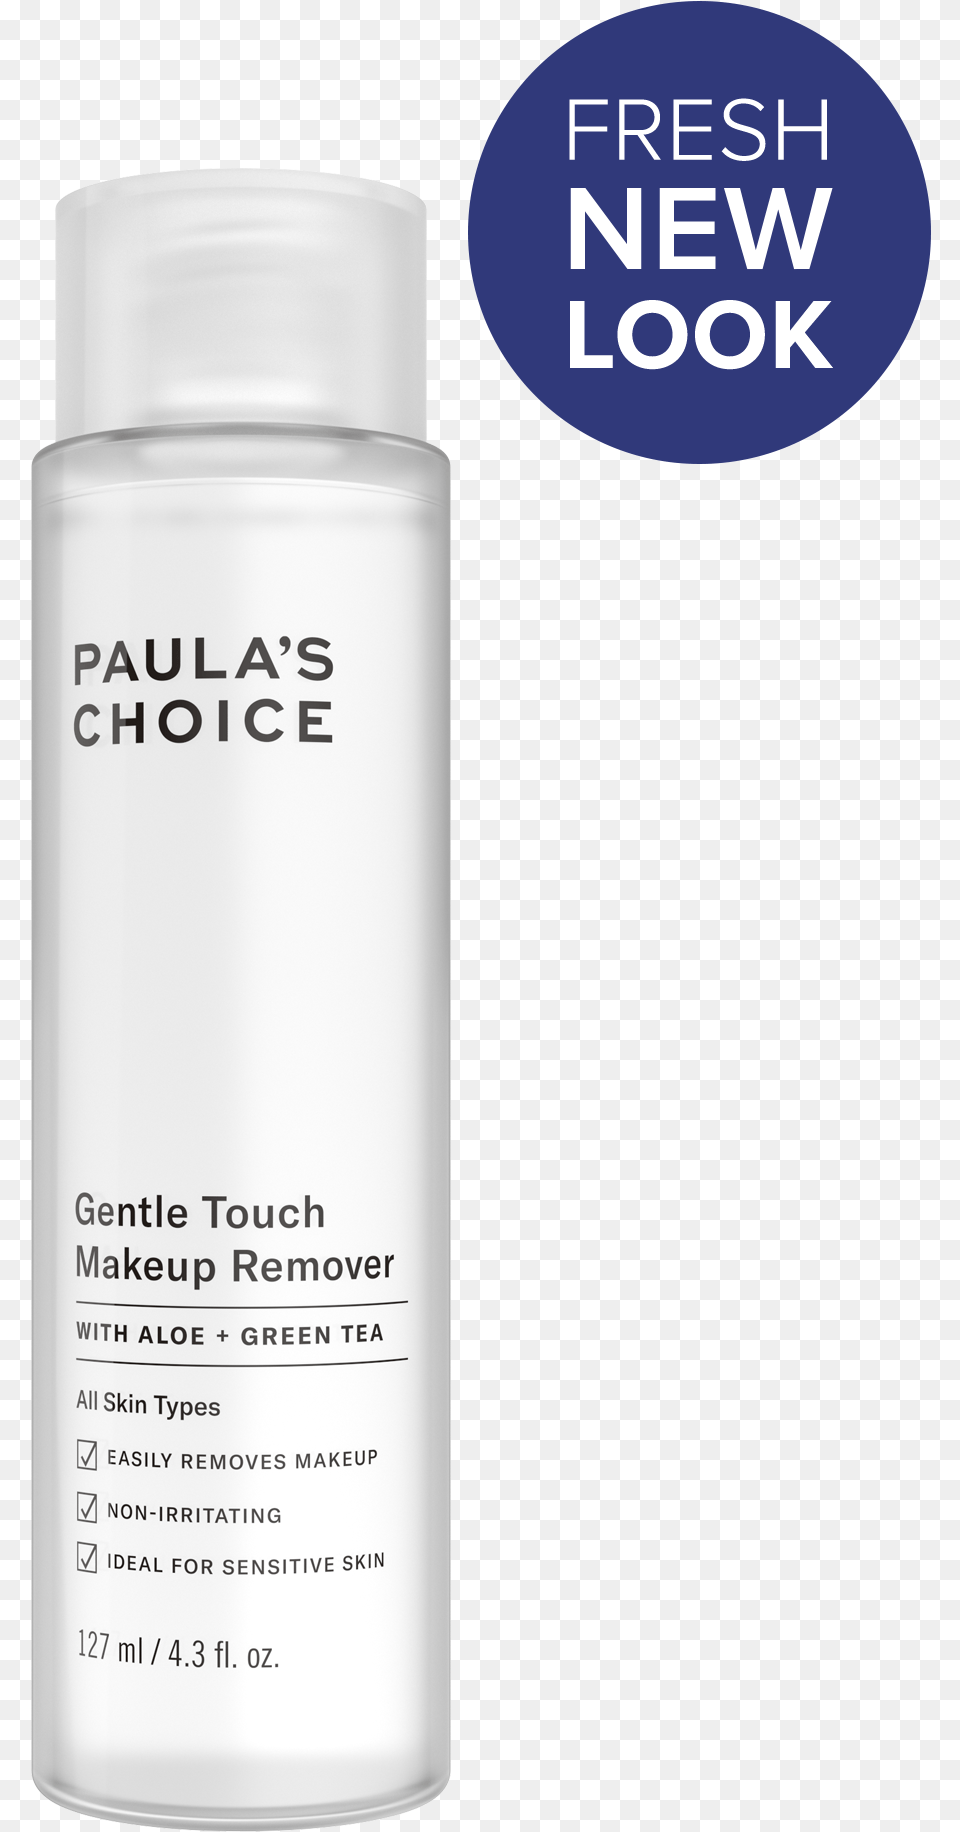 Gentle Touch Makeup Remover Choice Tinted Moisturizer, Bottle, Can, Tin, Cosmetics Png Image